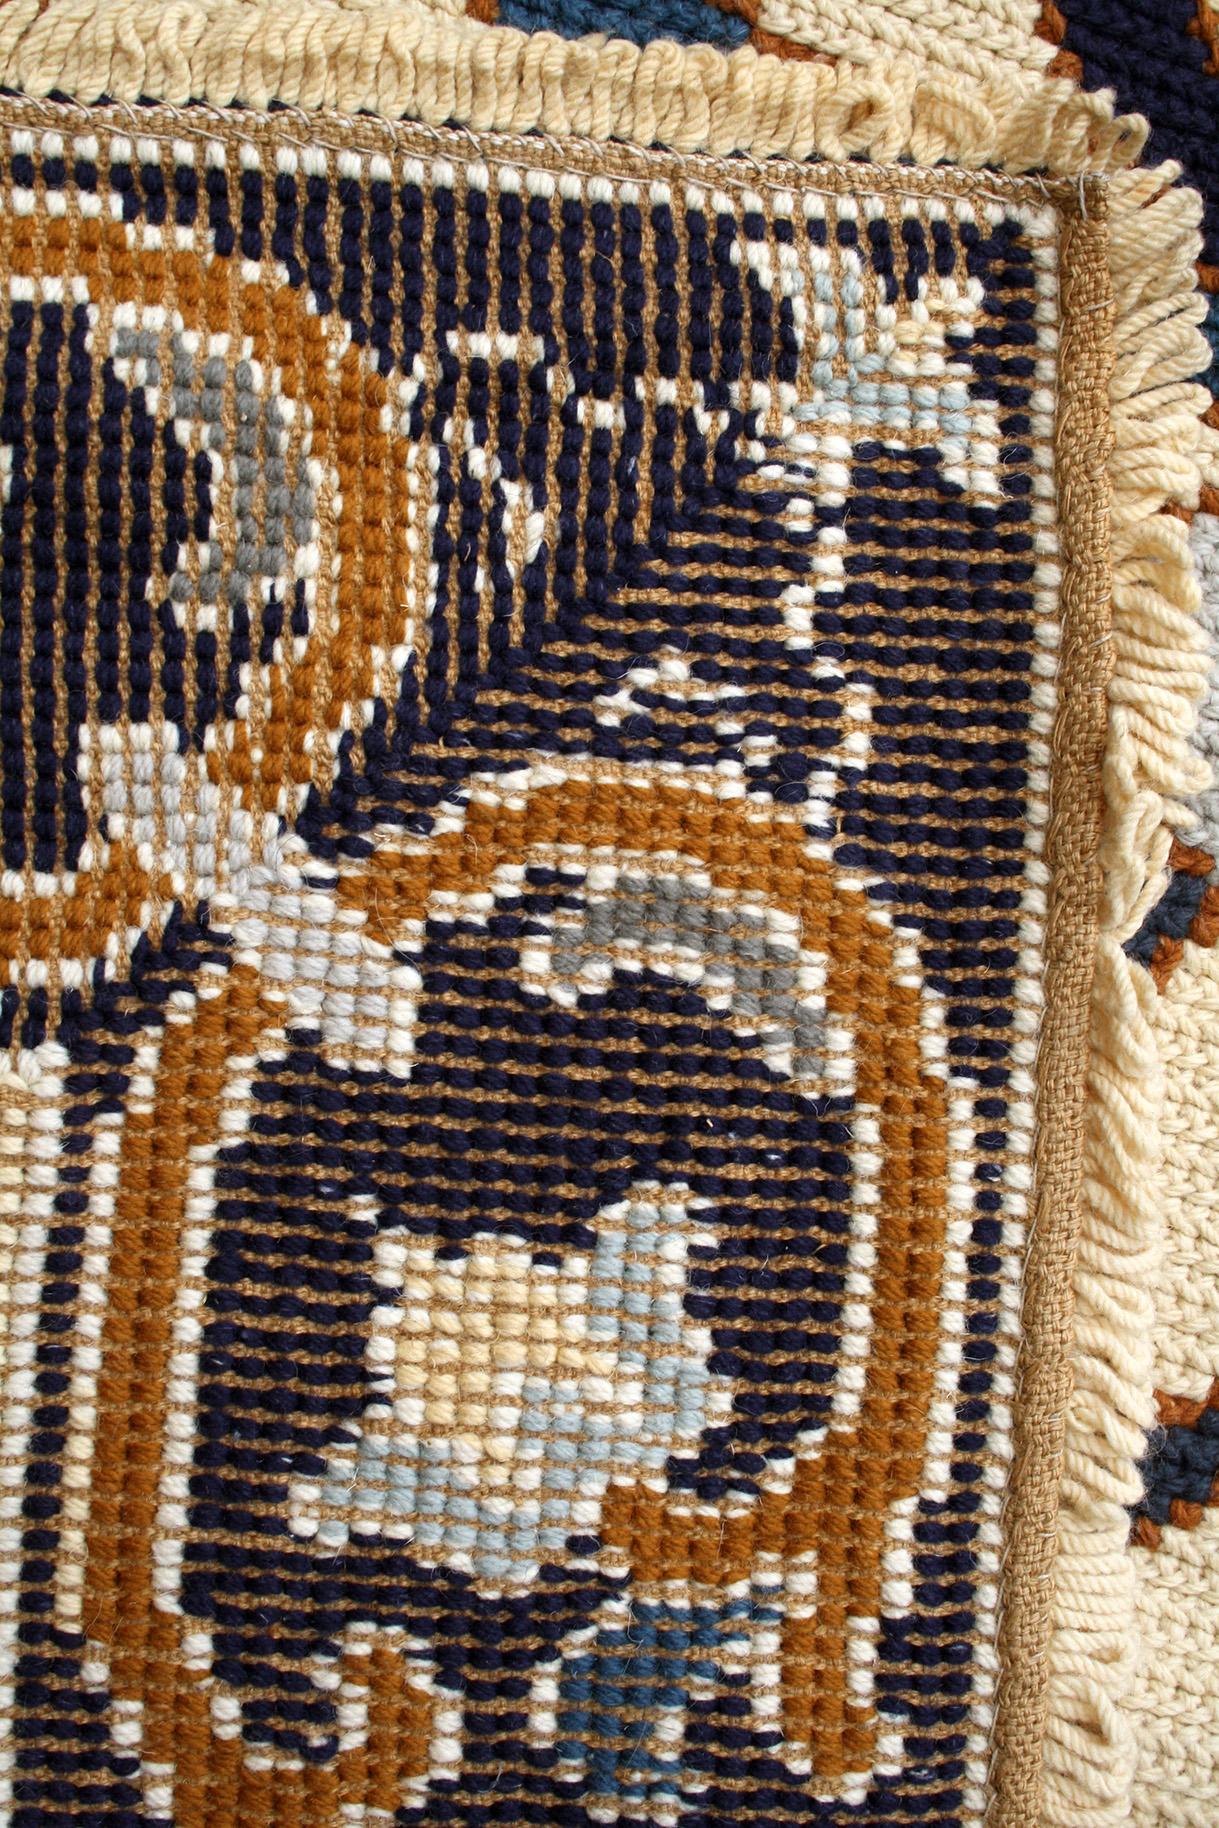 XL Floral European Portuguese Needlepoint Embroidered Arraiolos Rug Cream & Blue For Sale 2